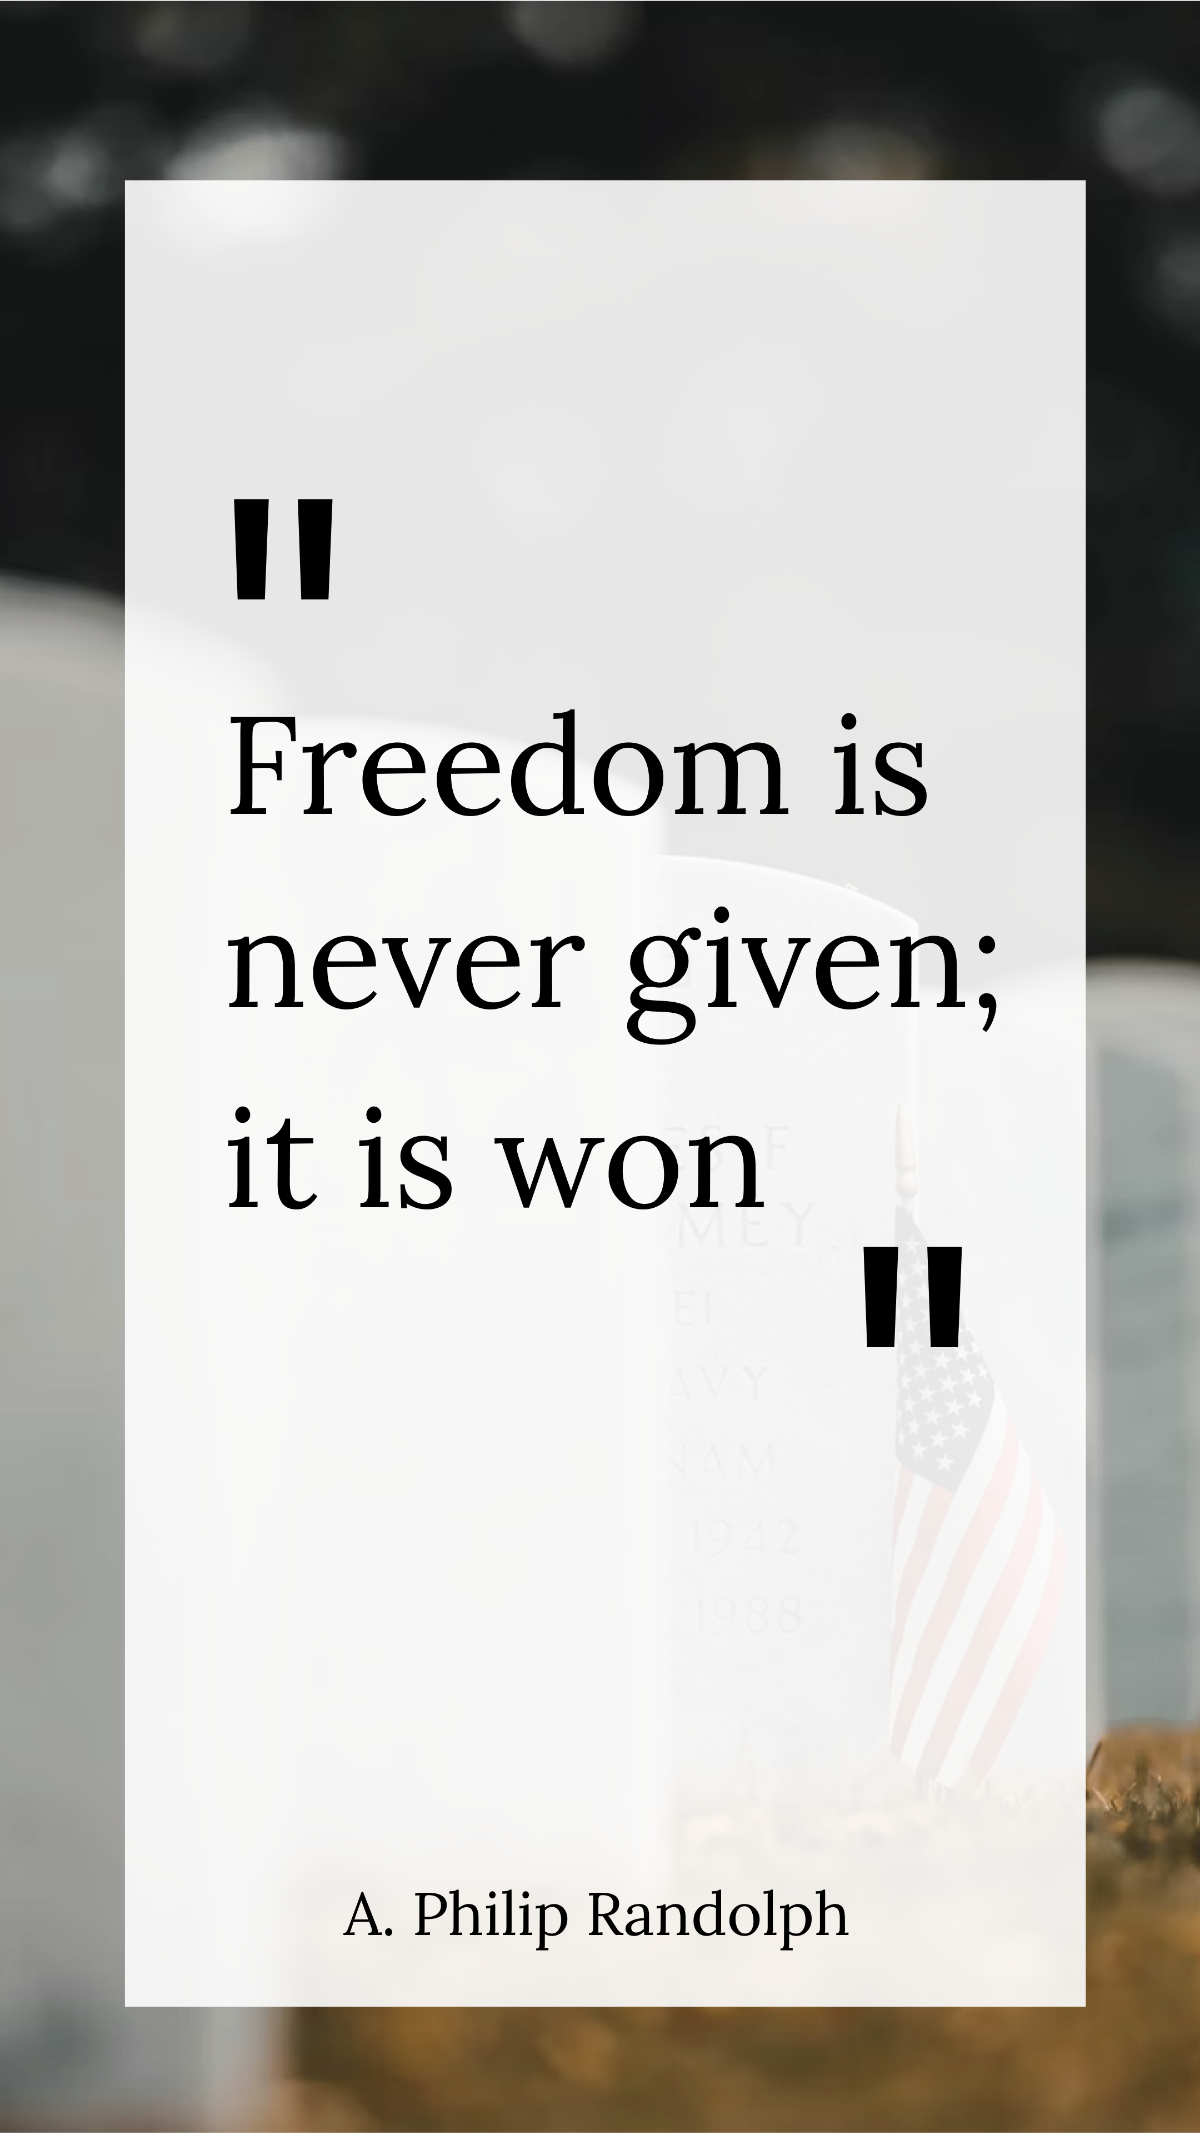 A. Philip Randolph - Freedom is never given; it is won.